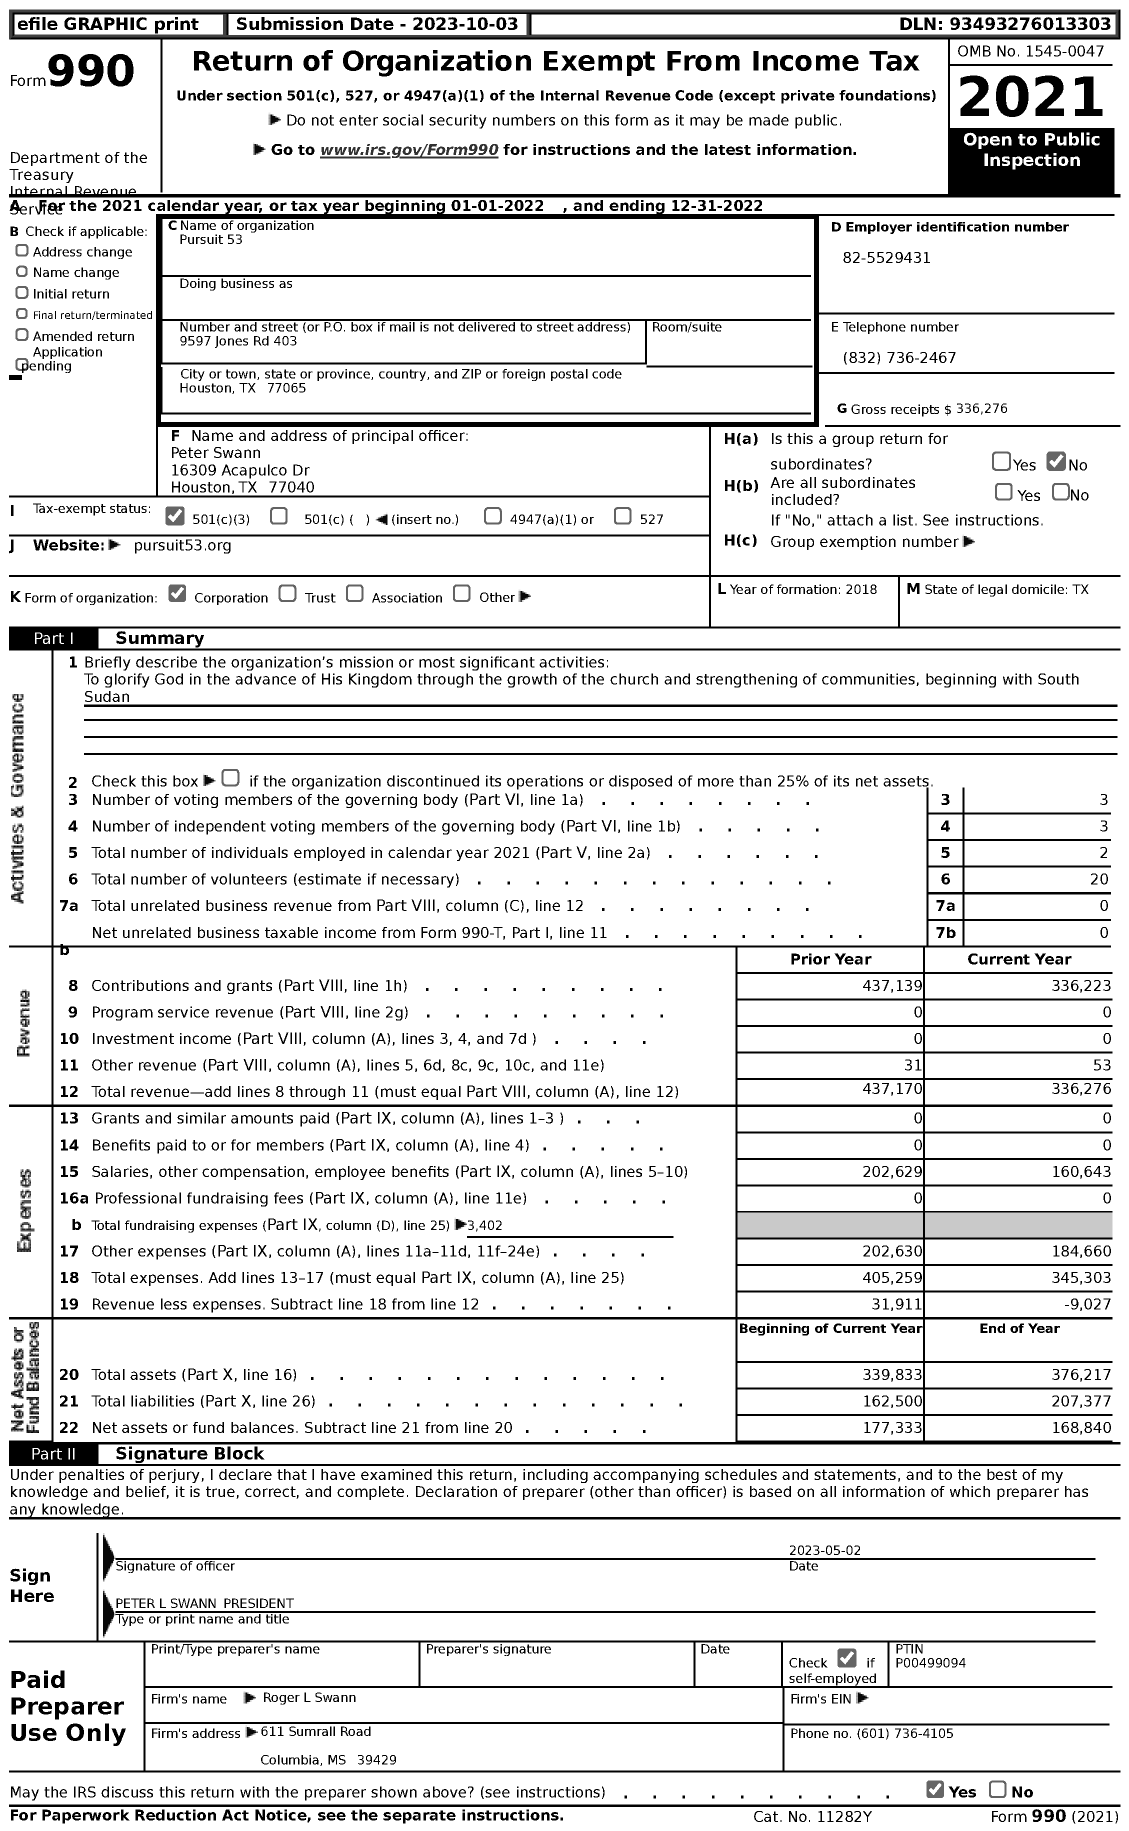 Image of first page of 2022 Form 990 for Pursuit 53